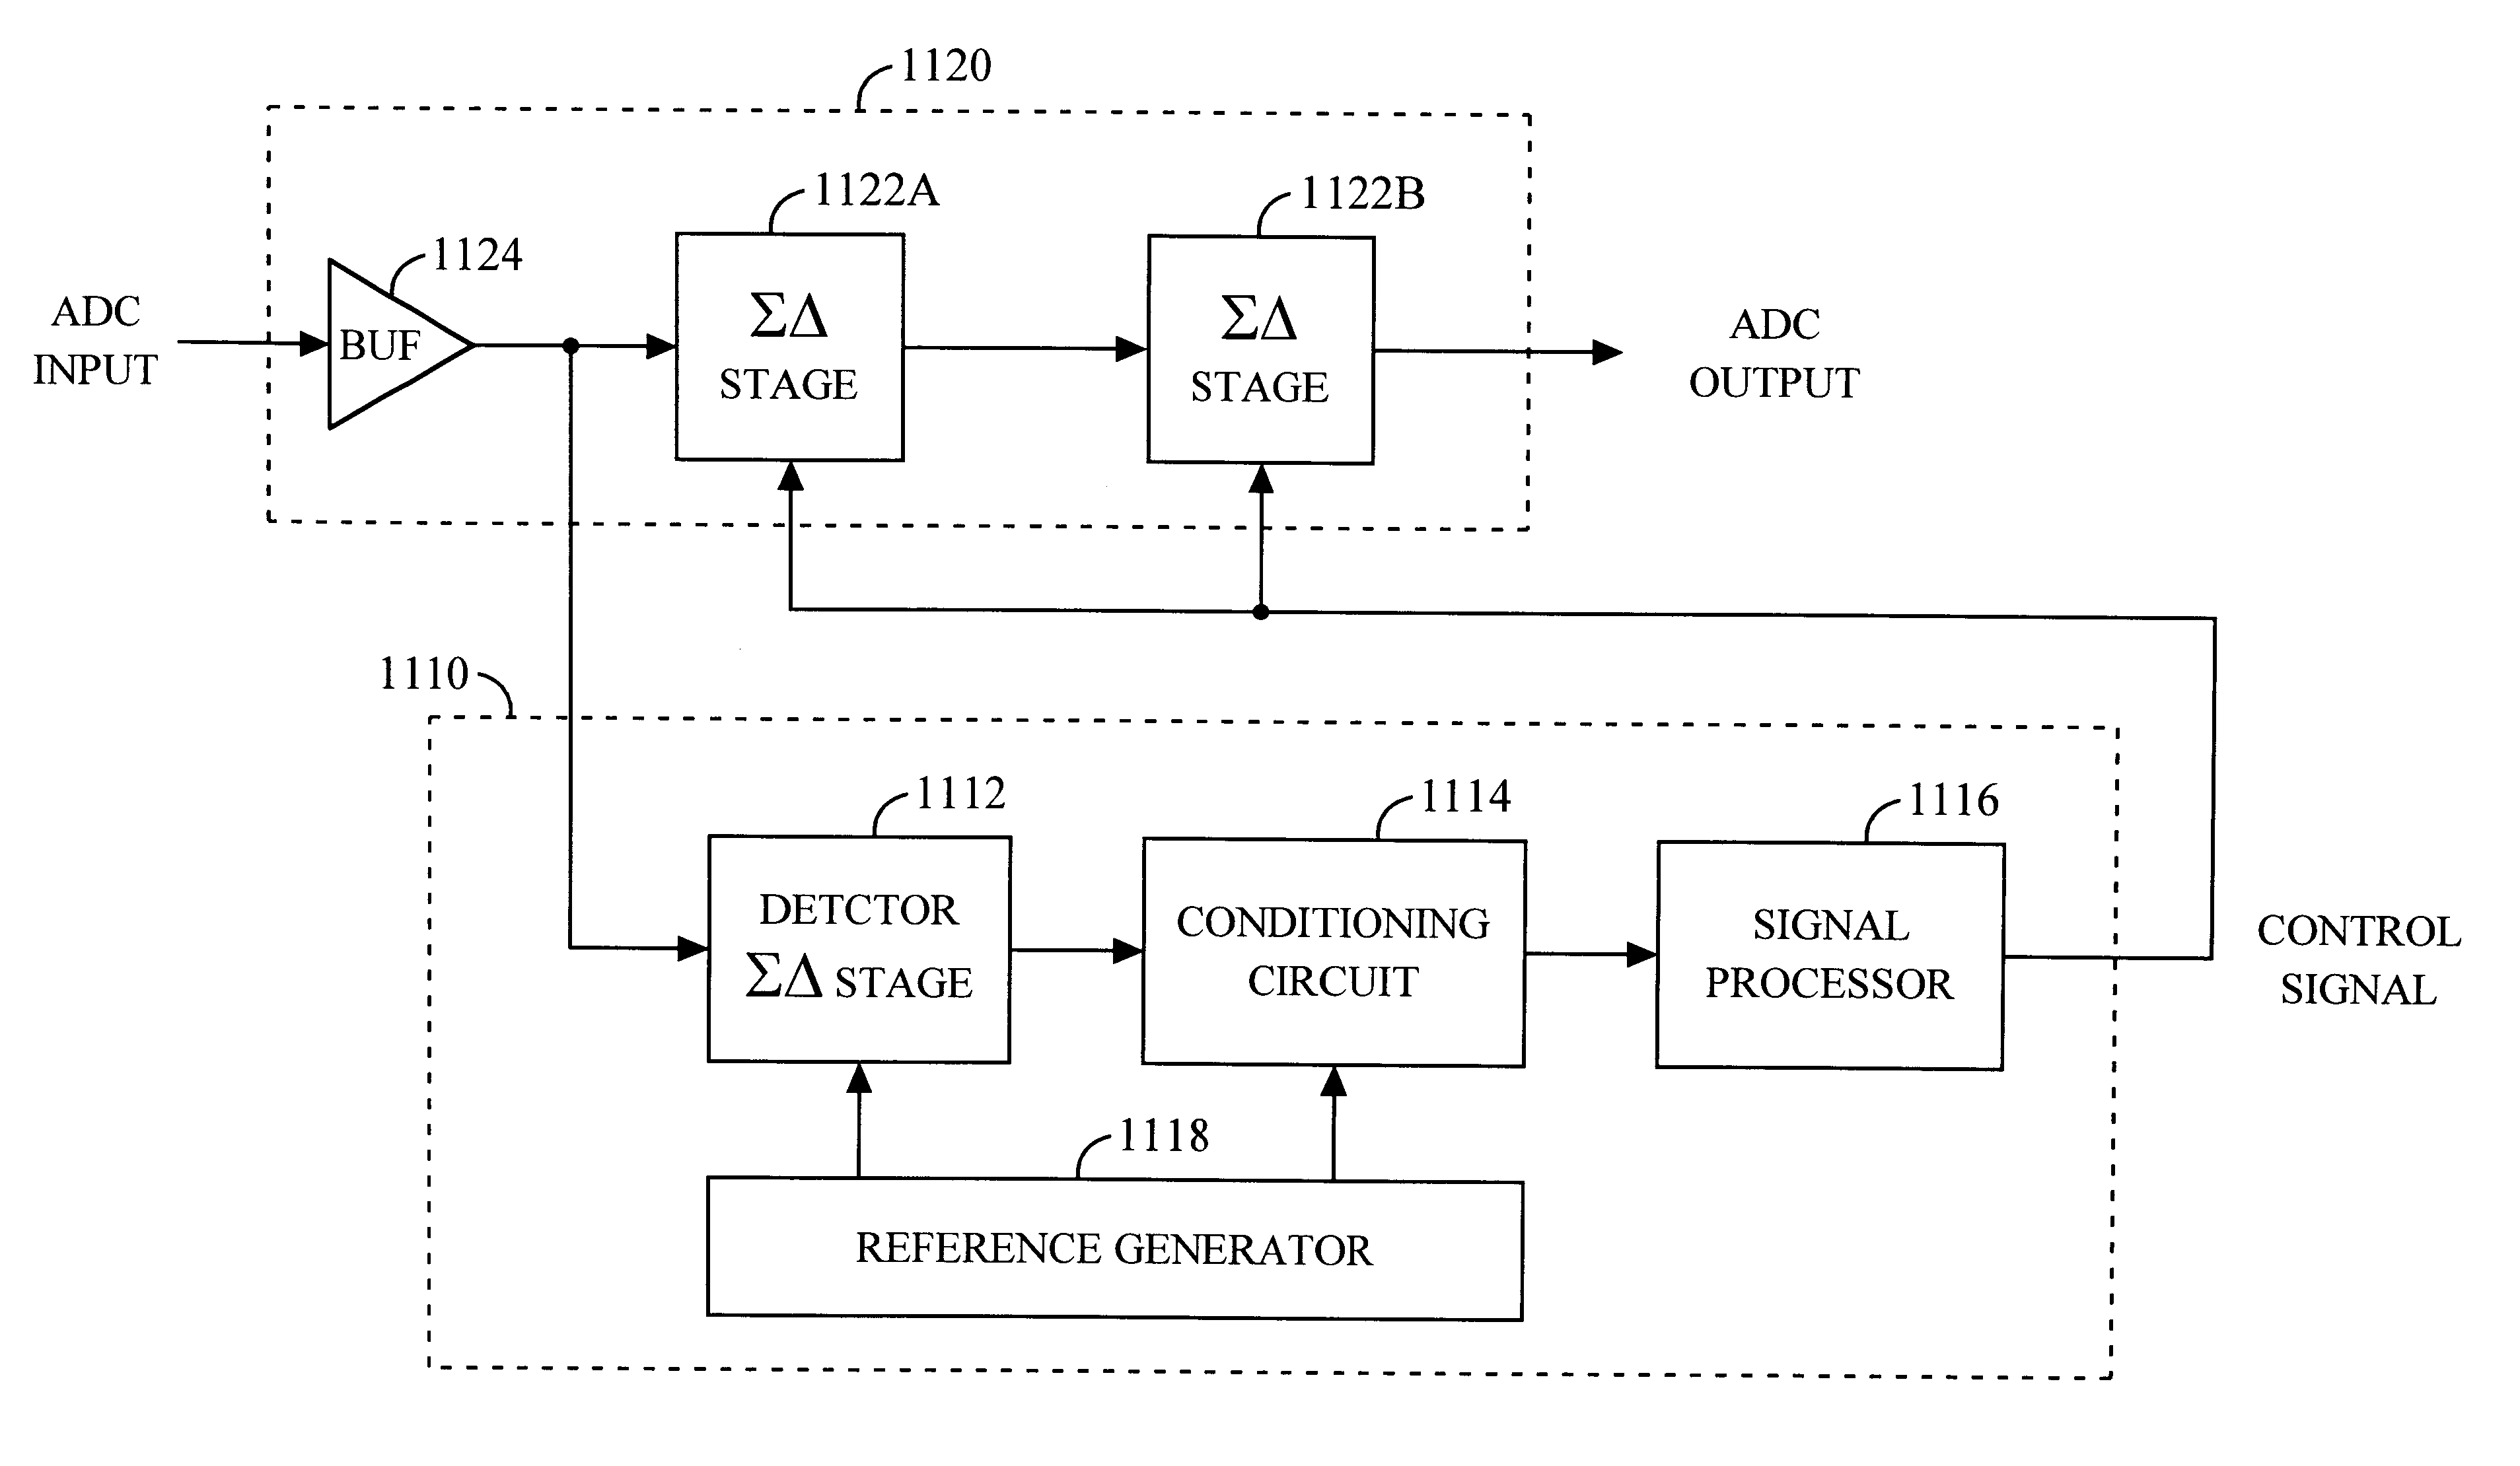 Method and apparatus for controlling stages of a multi-stage circuit